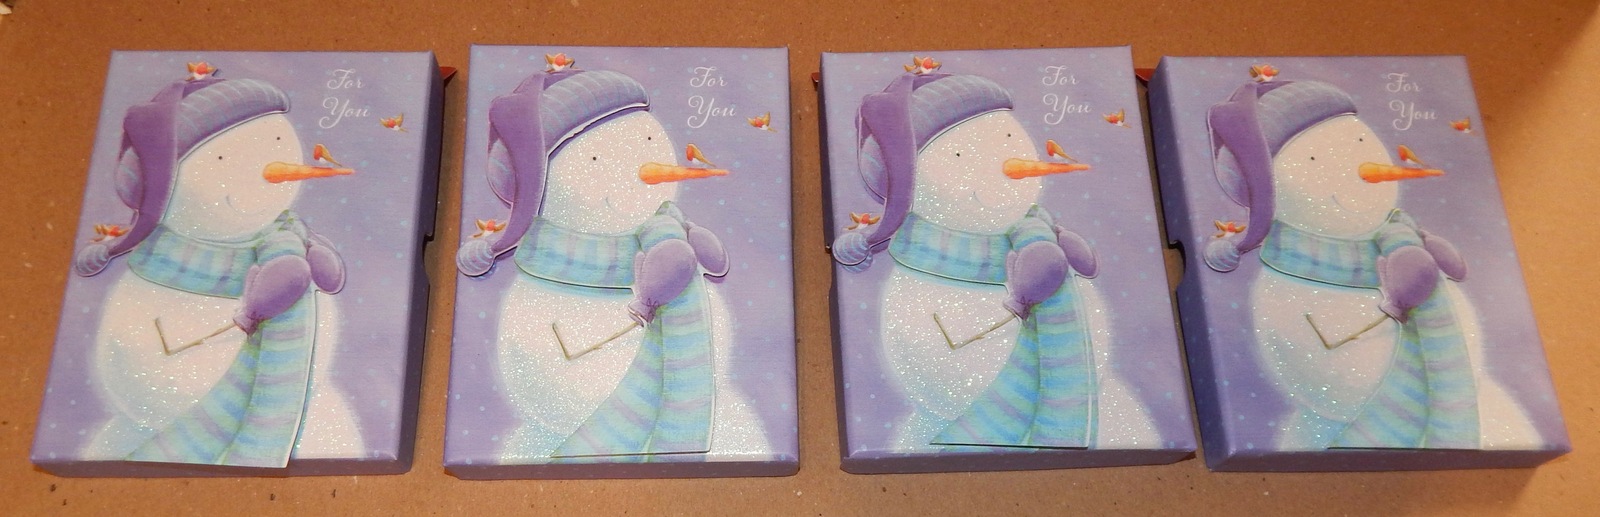 Christmas Gift Card Holders 4ea Trimmerry 5 1/2" x 4" ShopKo Snowman For You 92P - $14.49